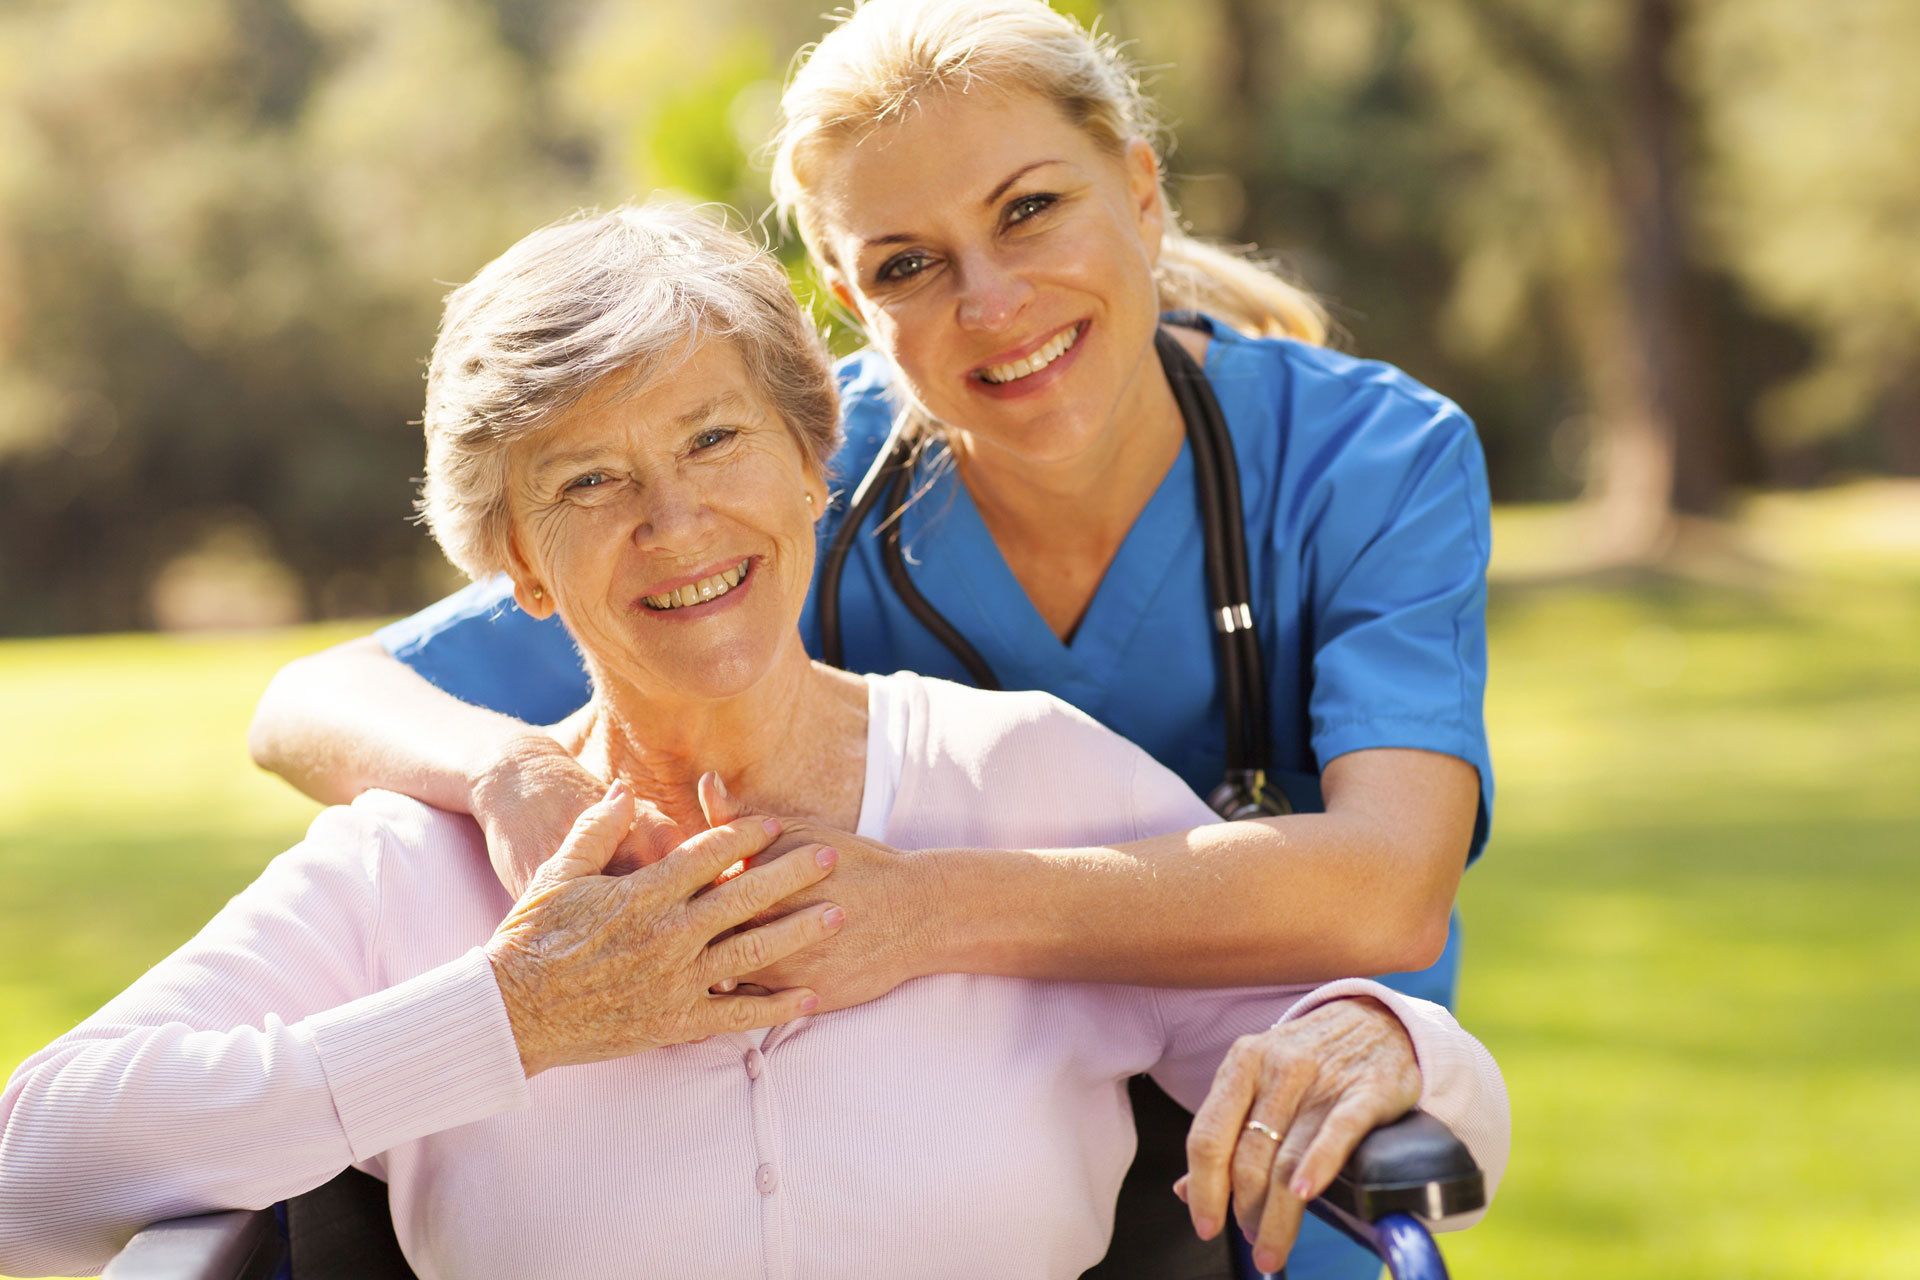 Professional Care Giver with Elderly Patient